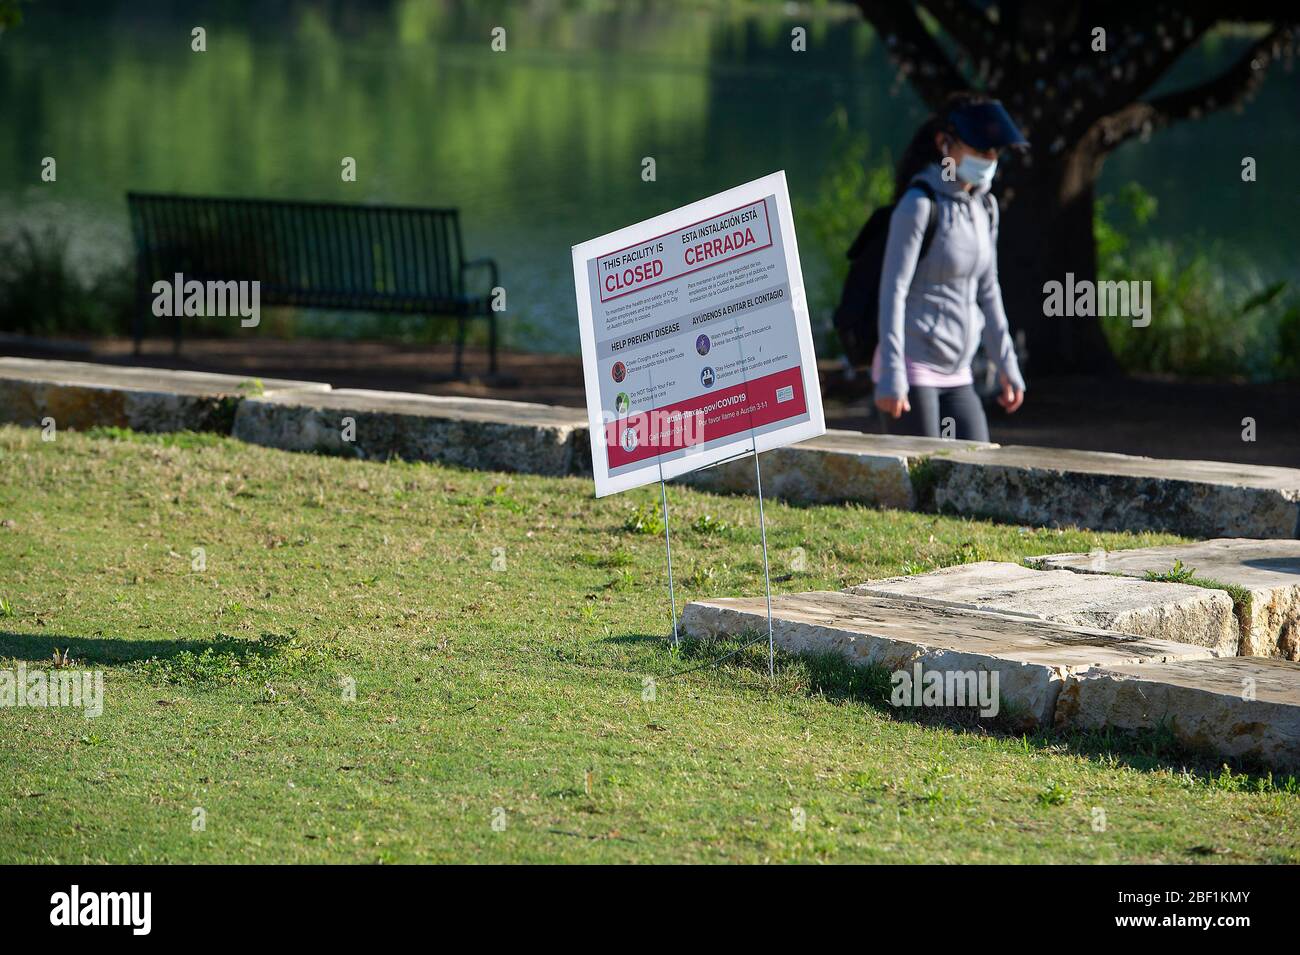 April 16, 2020: The City of Austin Parks Department issued signs that state "This facility is CLOSED"". To maintain the health and safety of City of Austin employees and the public the City of Austin facility is closed. Austin, Texas. Mario Cantu/CSM Stock Photo